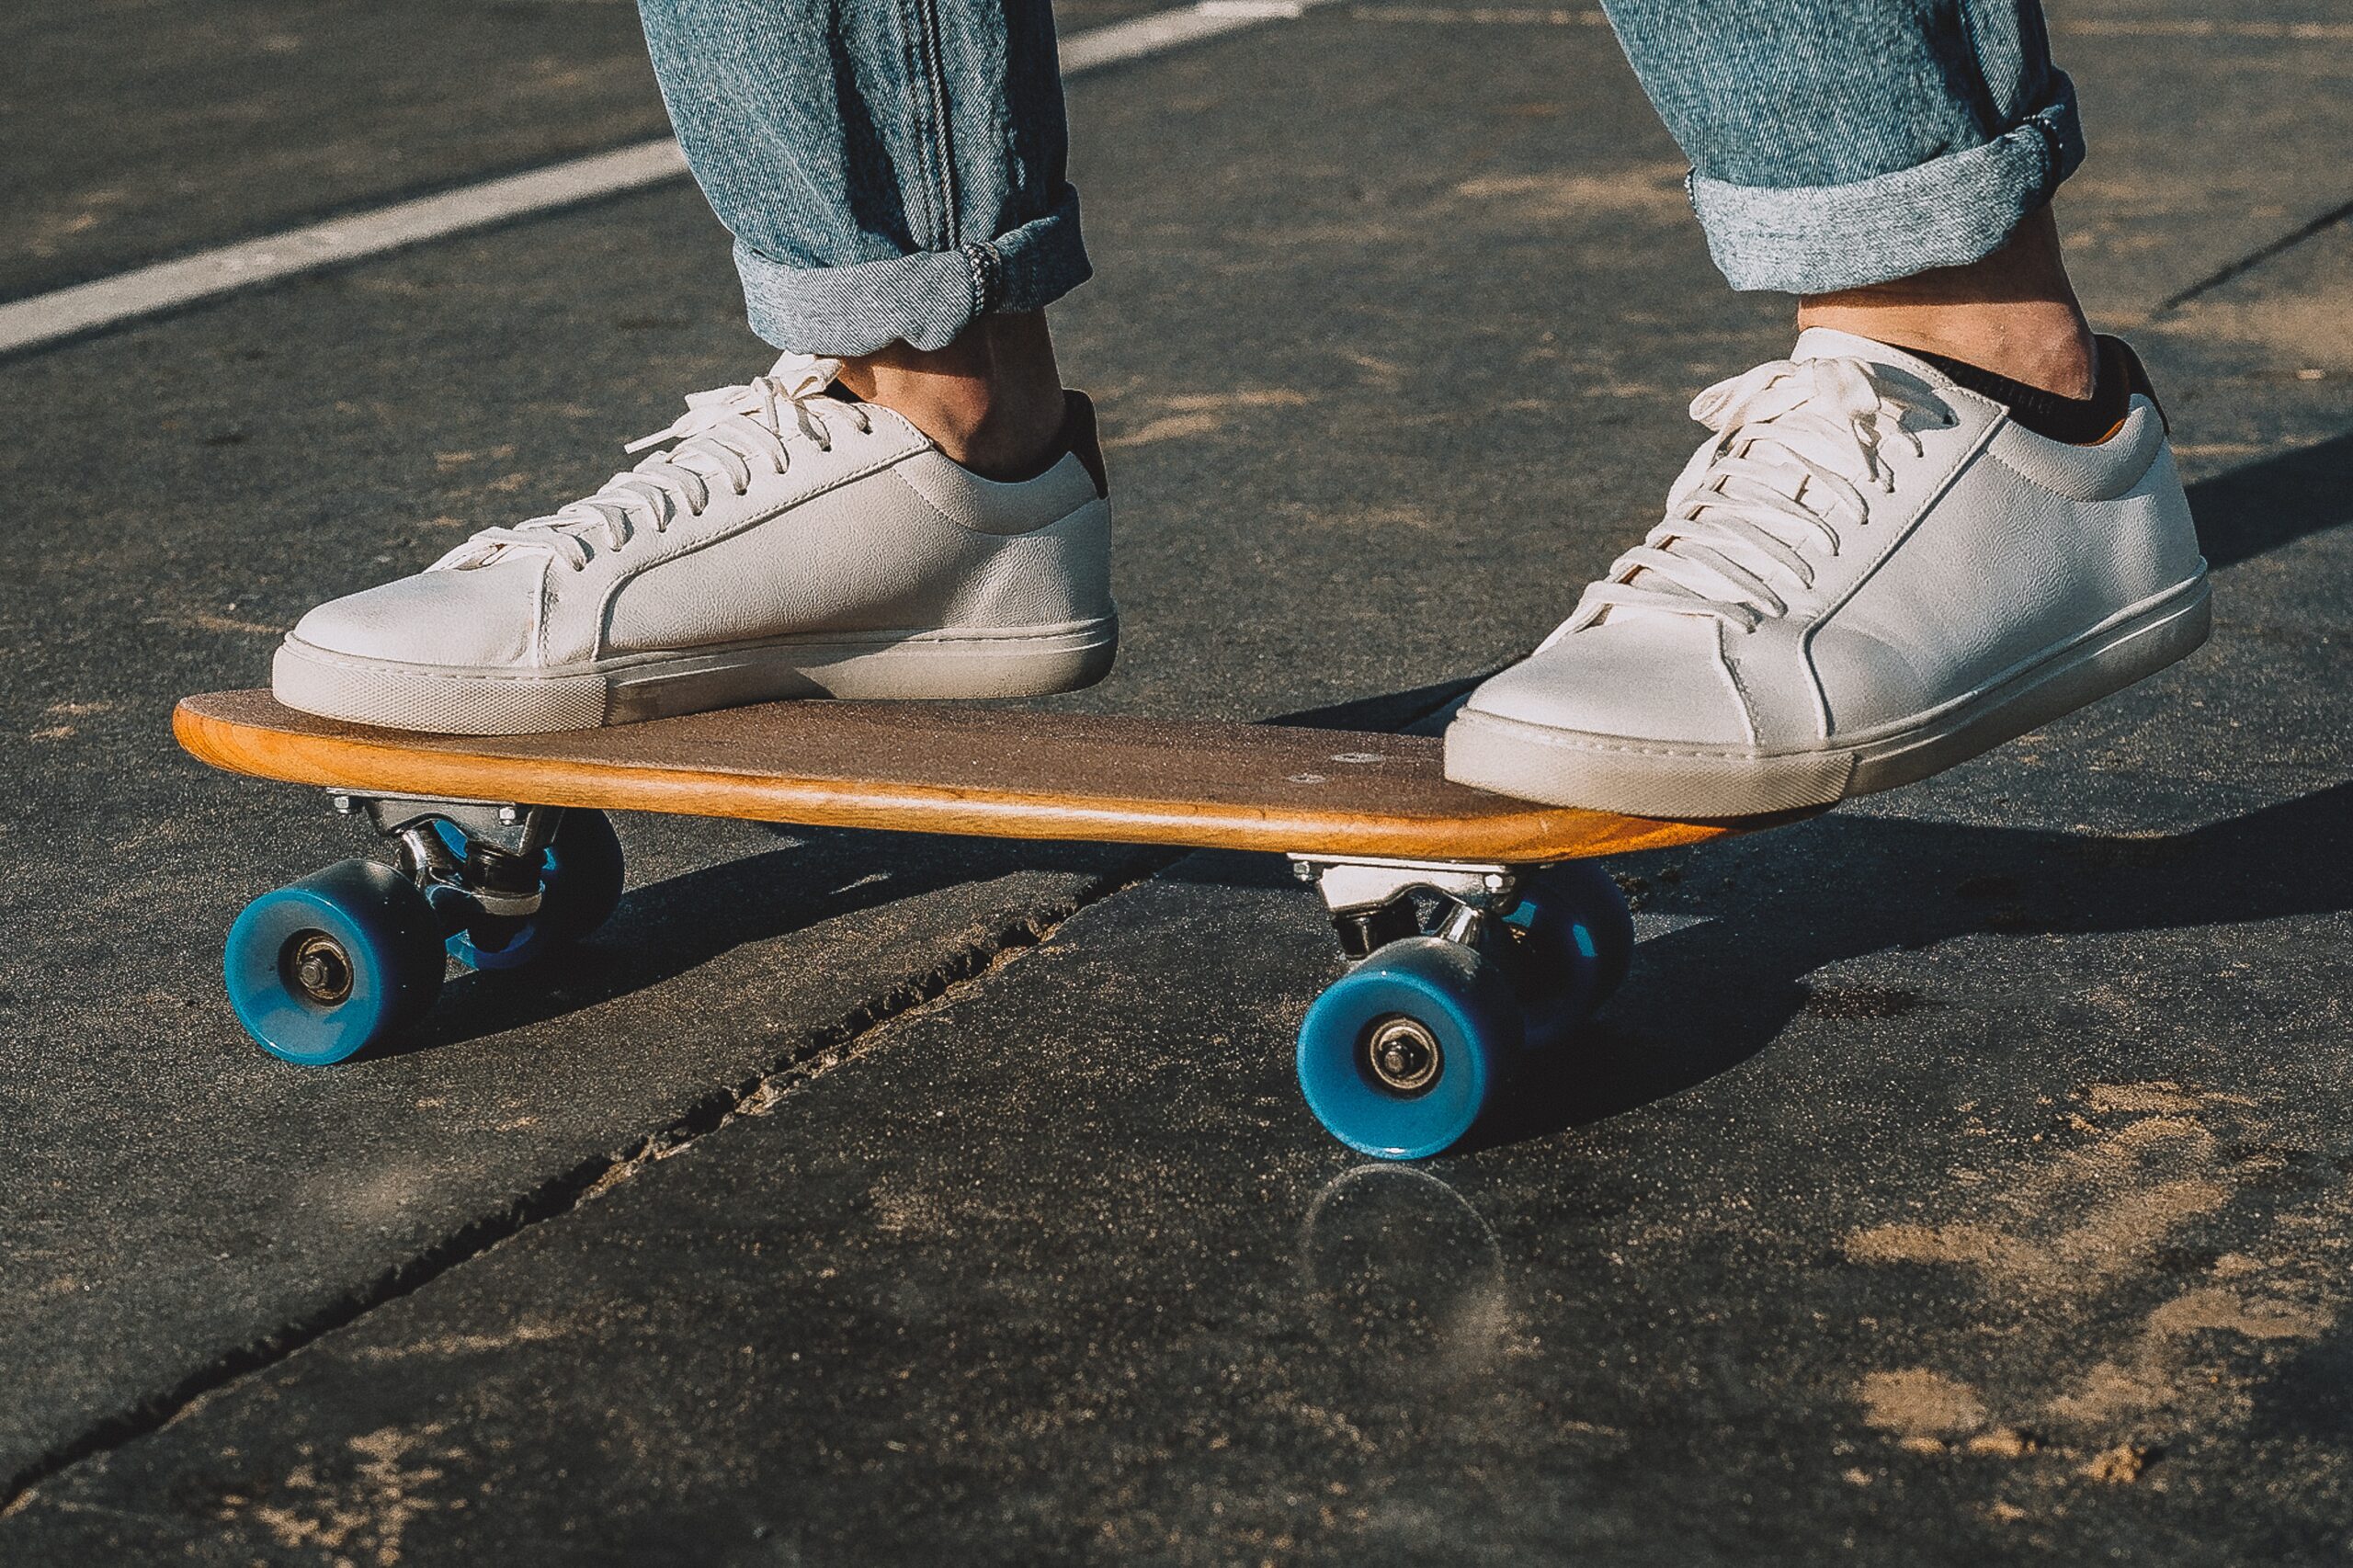 How Do You Choose Skateboard Shoes With Durable Soles For Grip?